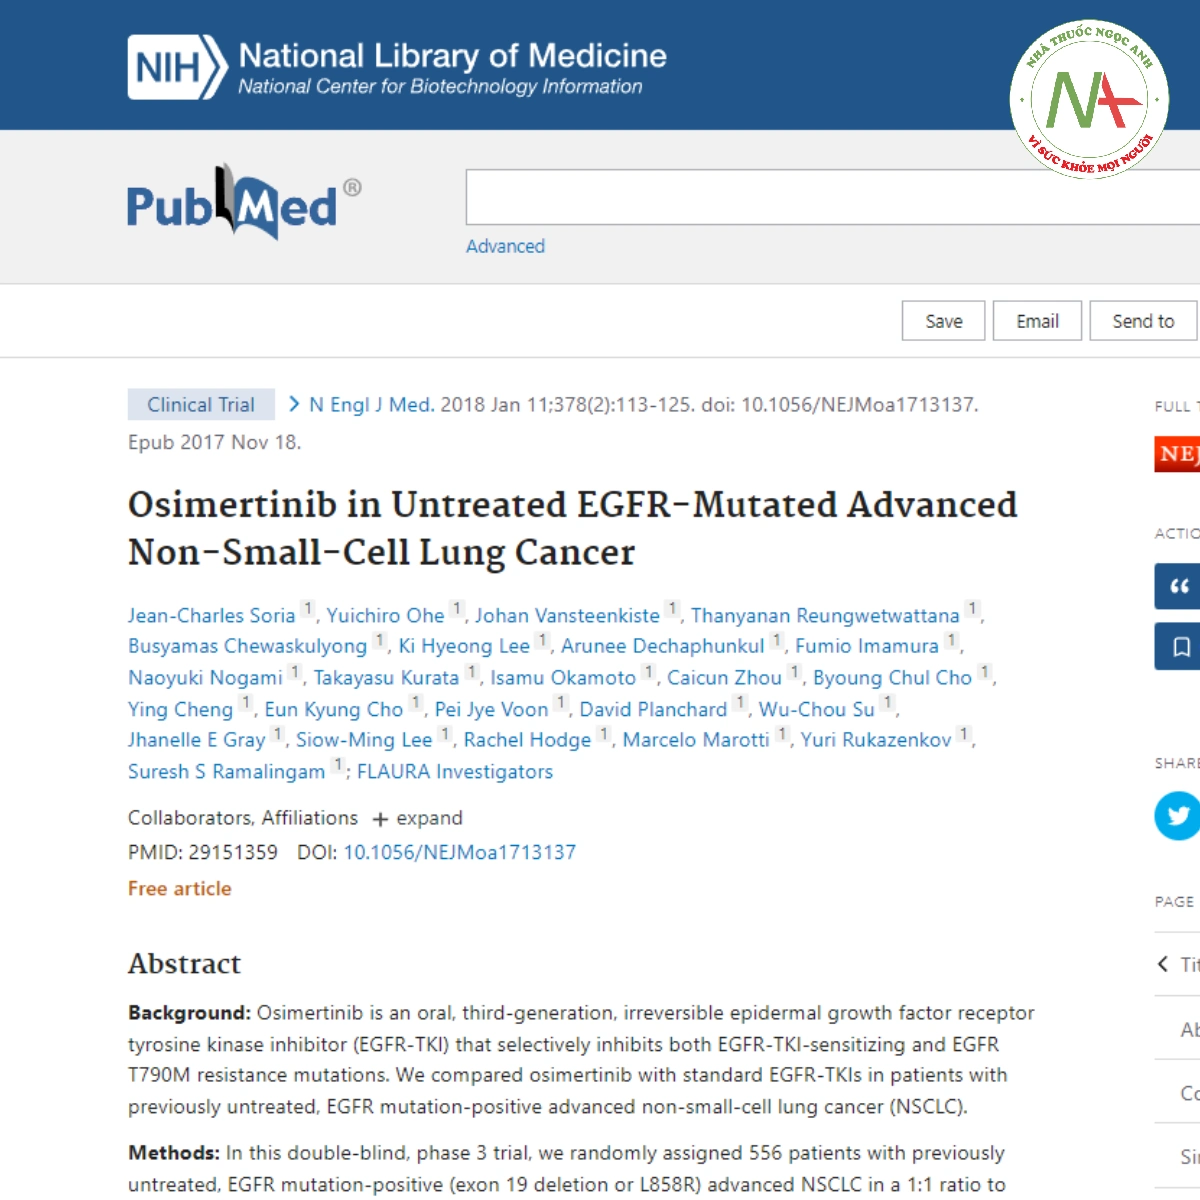 Osimertinib in Untreated EGFR-Mutated Advanced Non-Small-Cell Lung Cancer